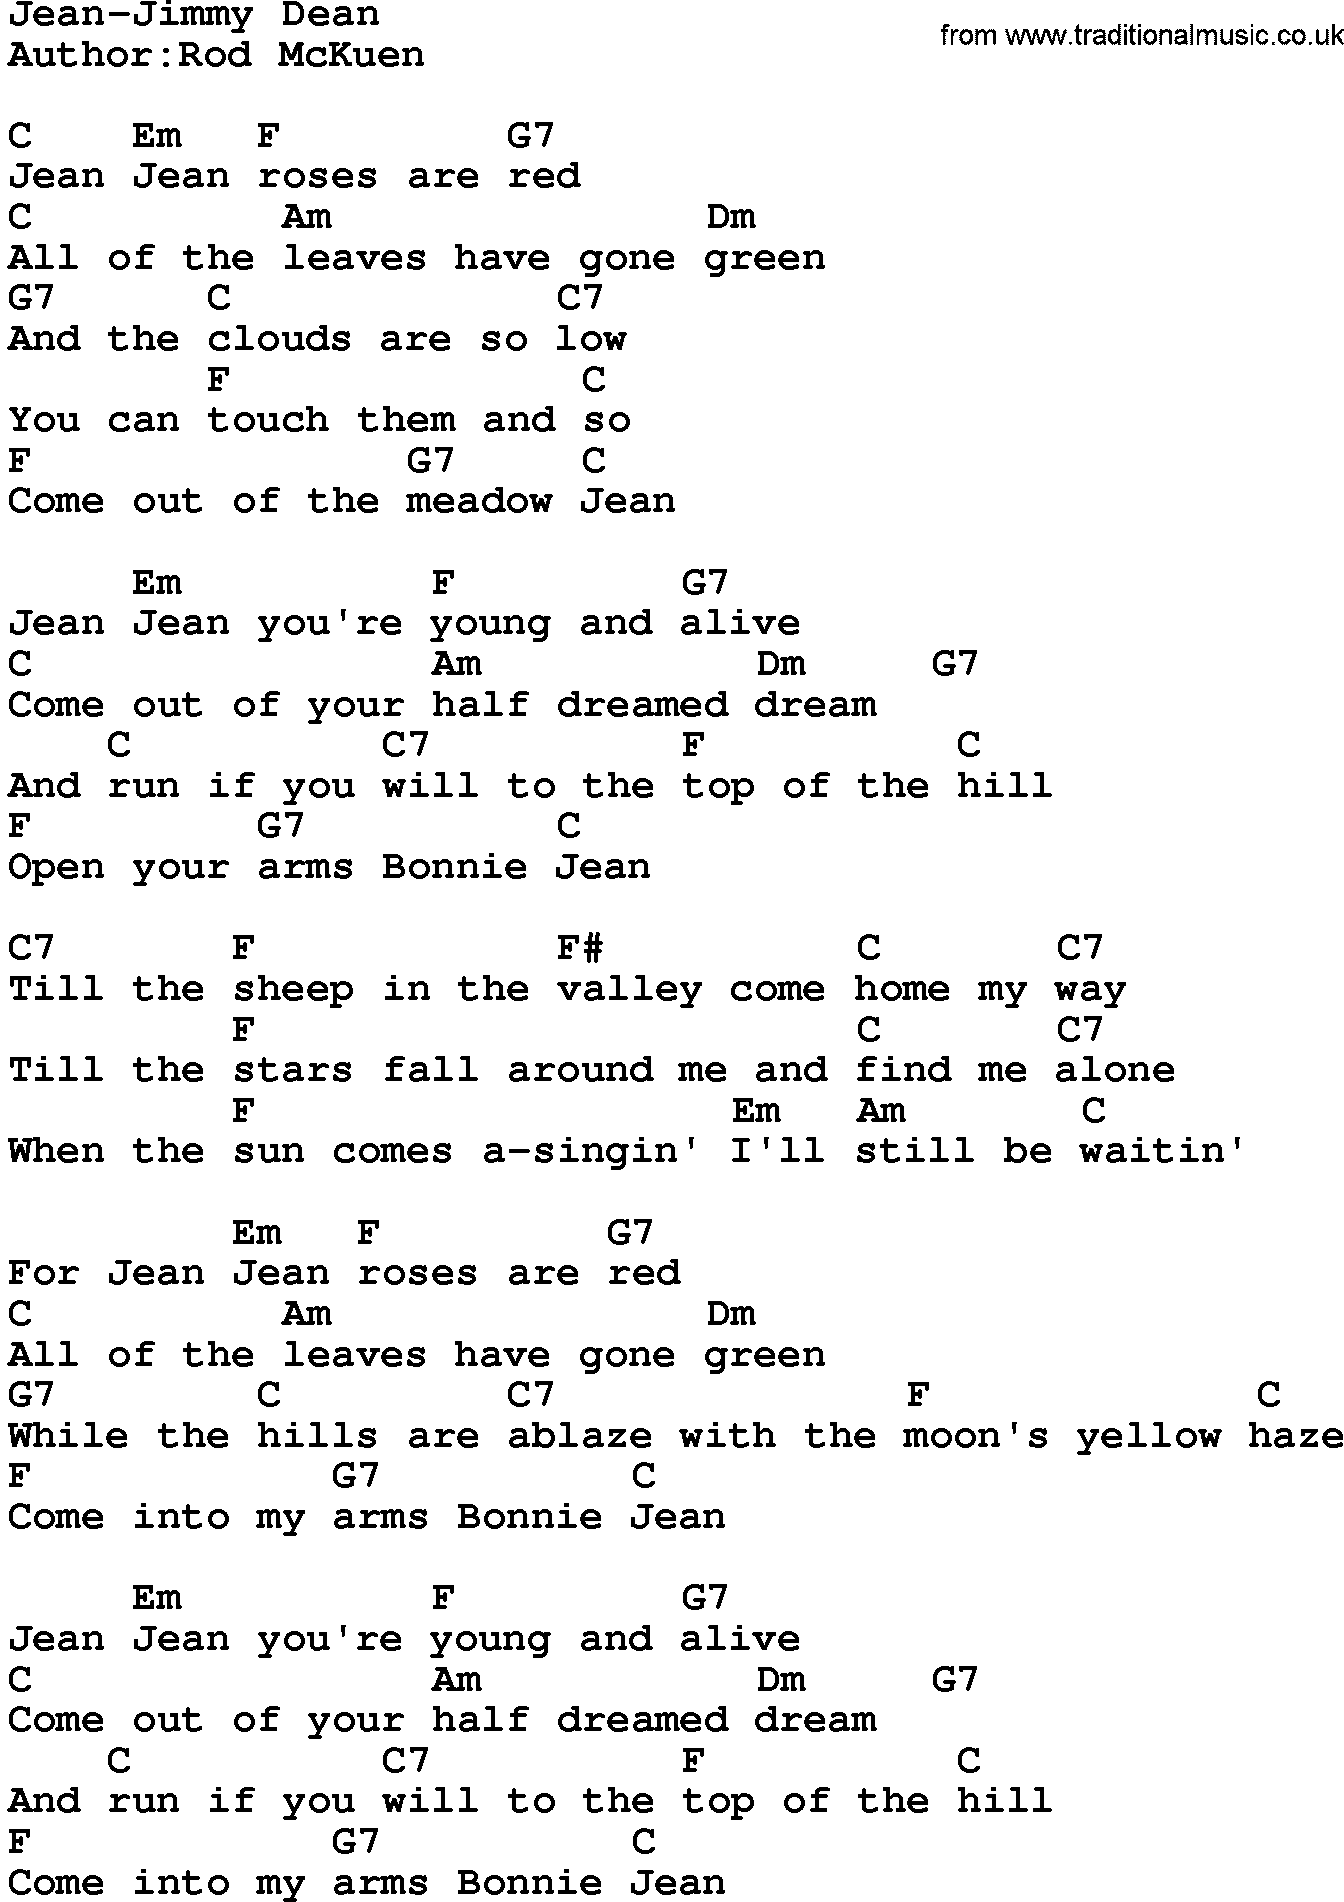 Country music song: Jean-Jimmy Dean lyrics and chords